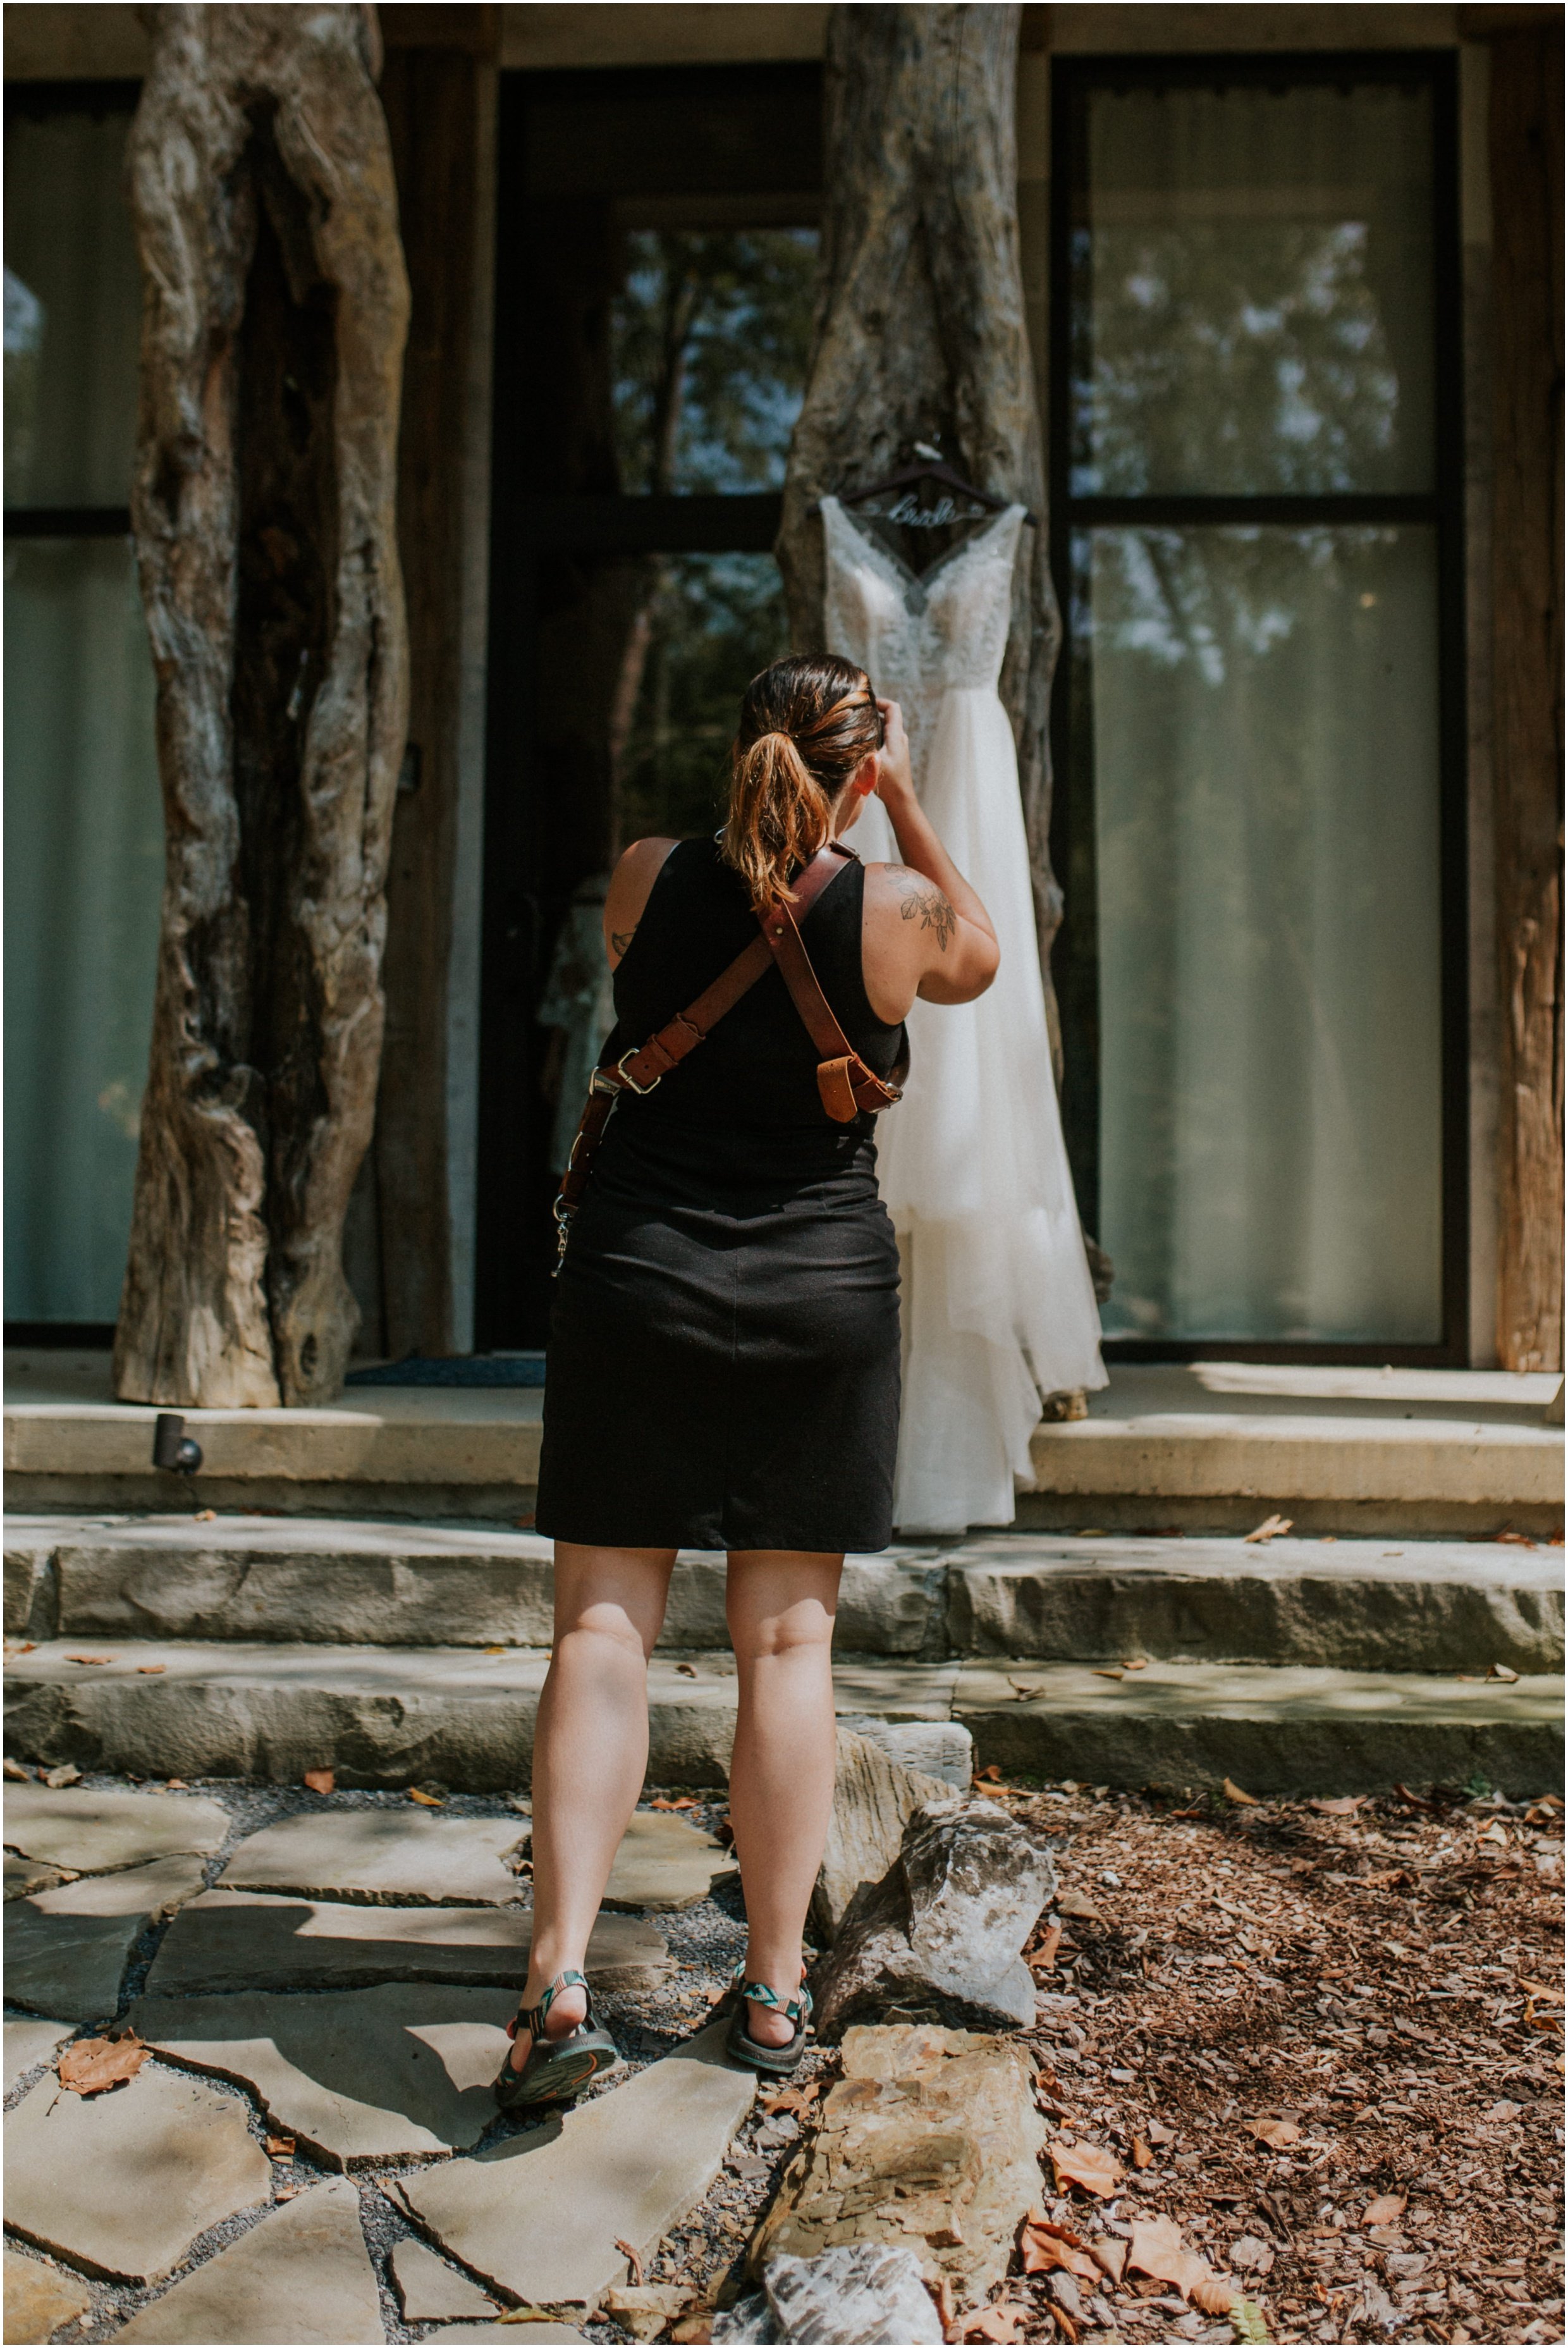 A little dress shot action at the Greek Cottage at Waterstone for Darren and Lyndsey's wedding!